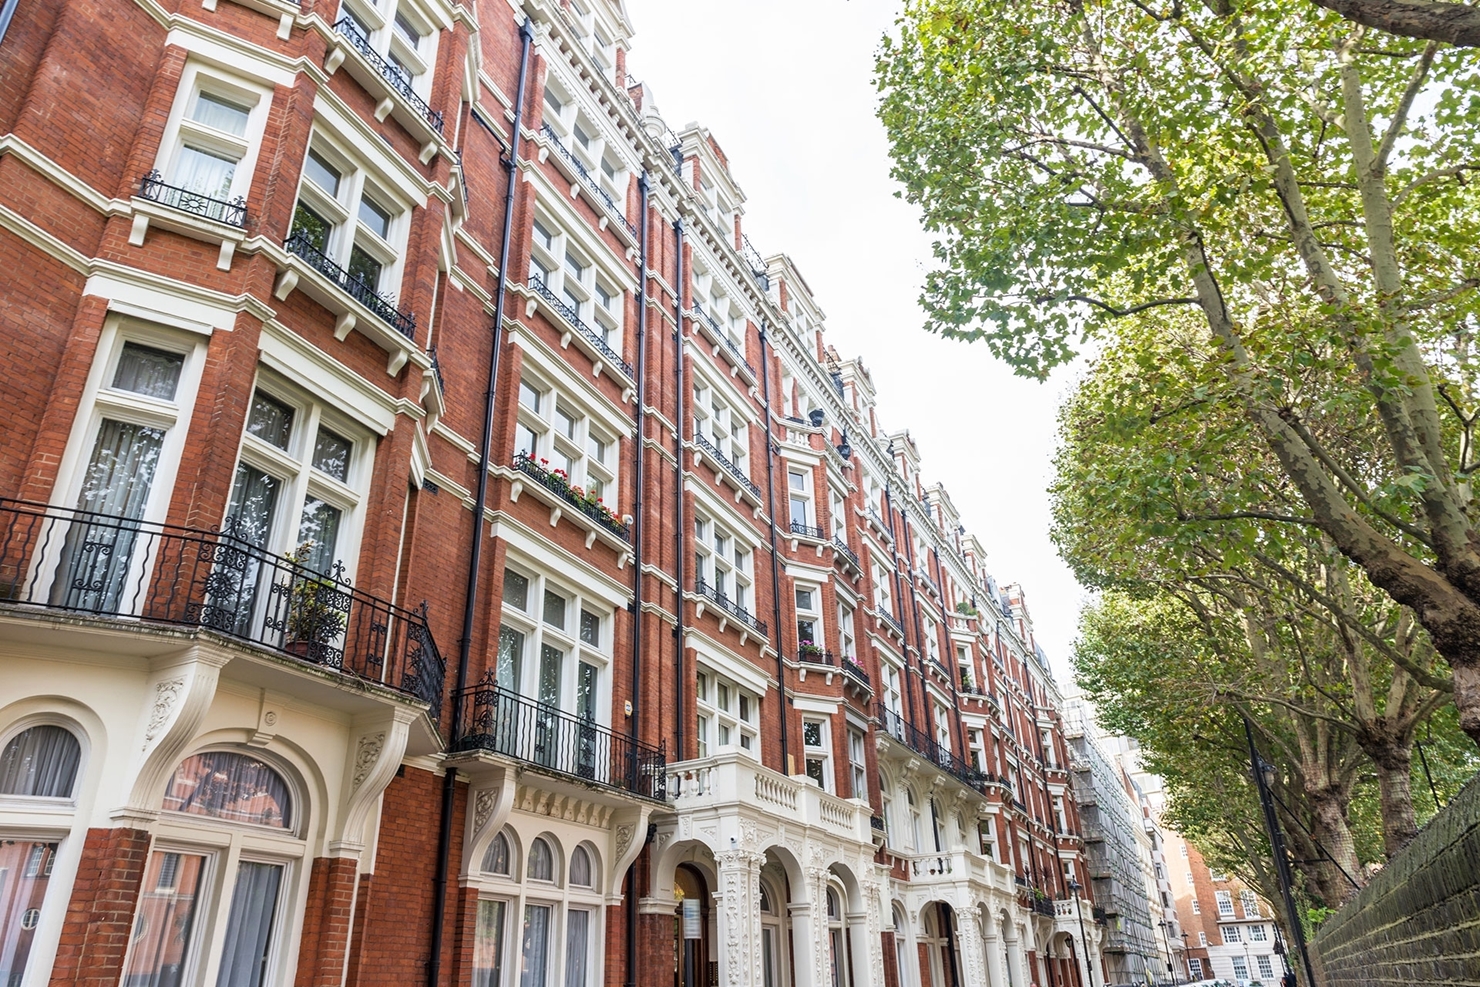 The number of London properties owned by Qatari individuals increased by almost 50% between 2018 and 2021